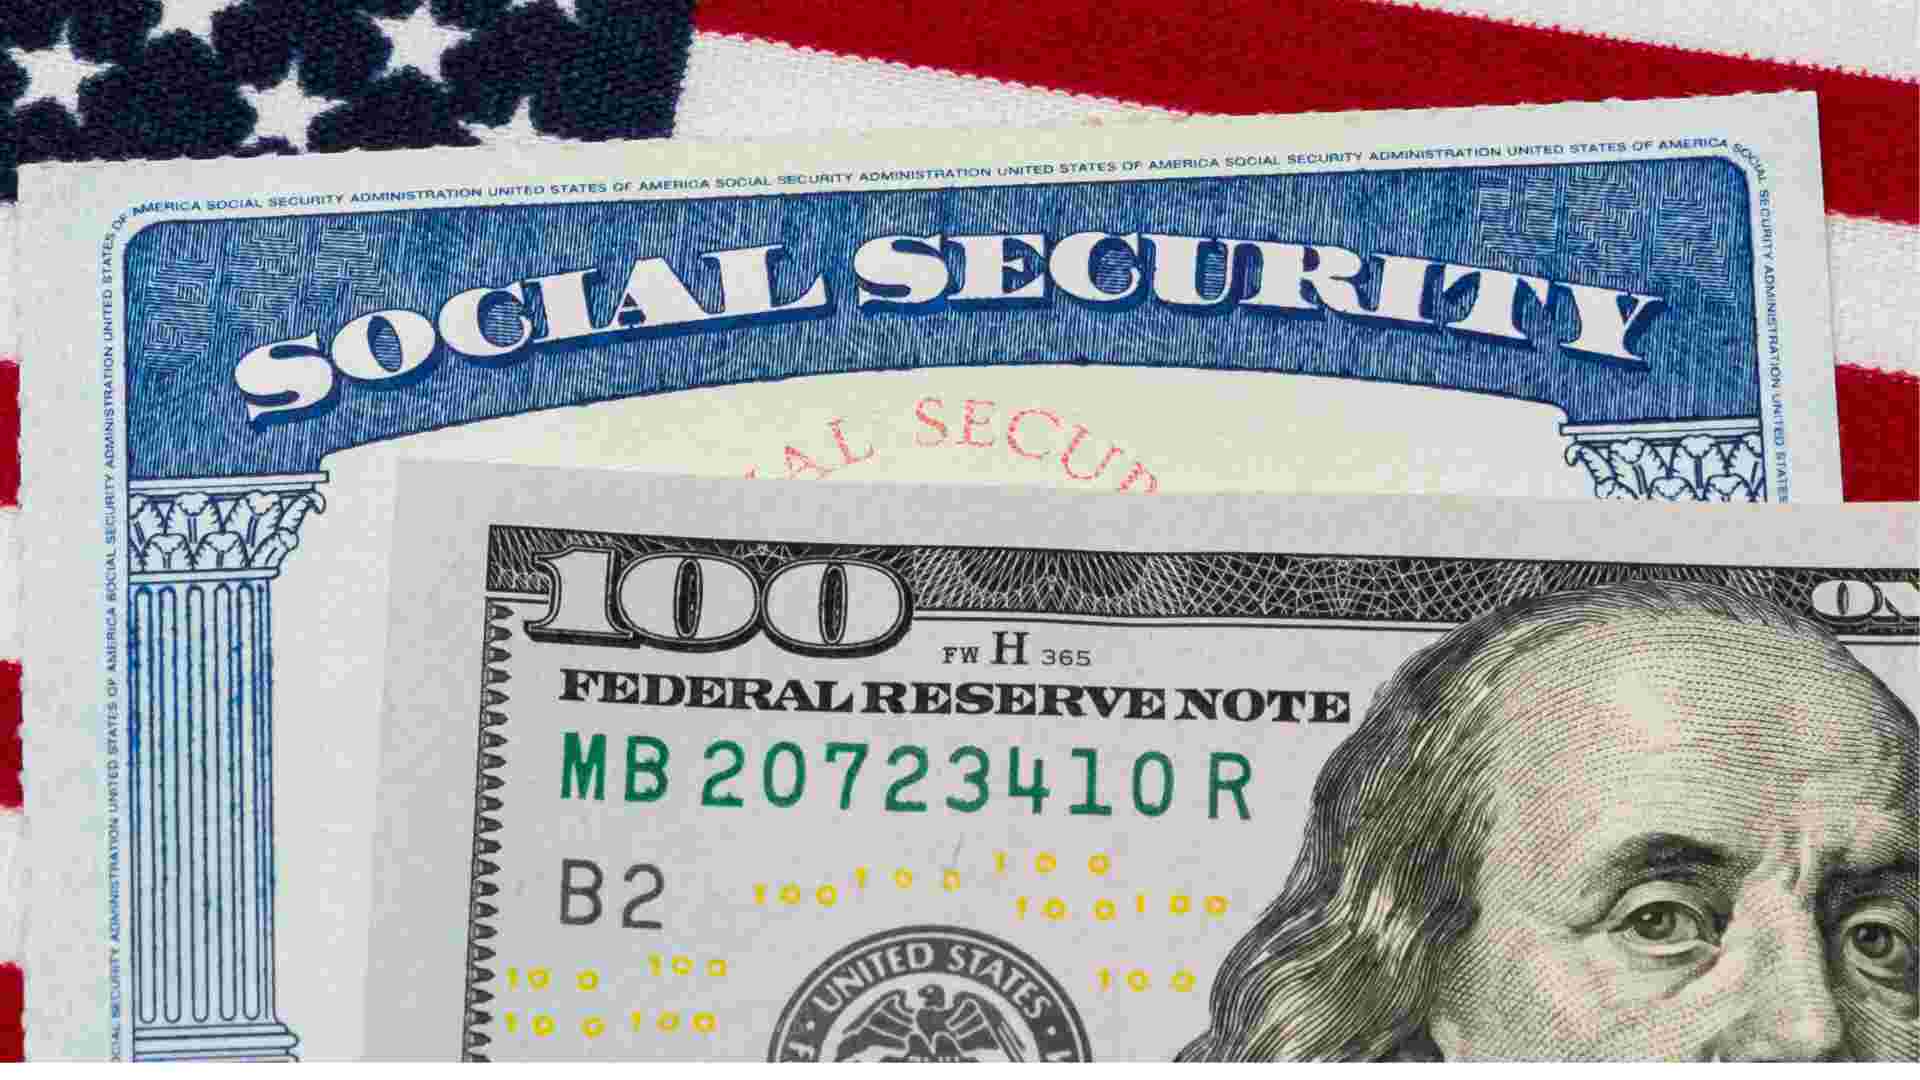 Social Security payment on November 22 for those on retirement benefits